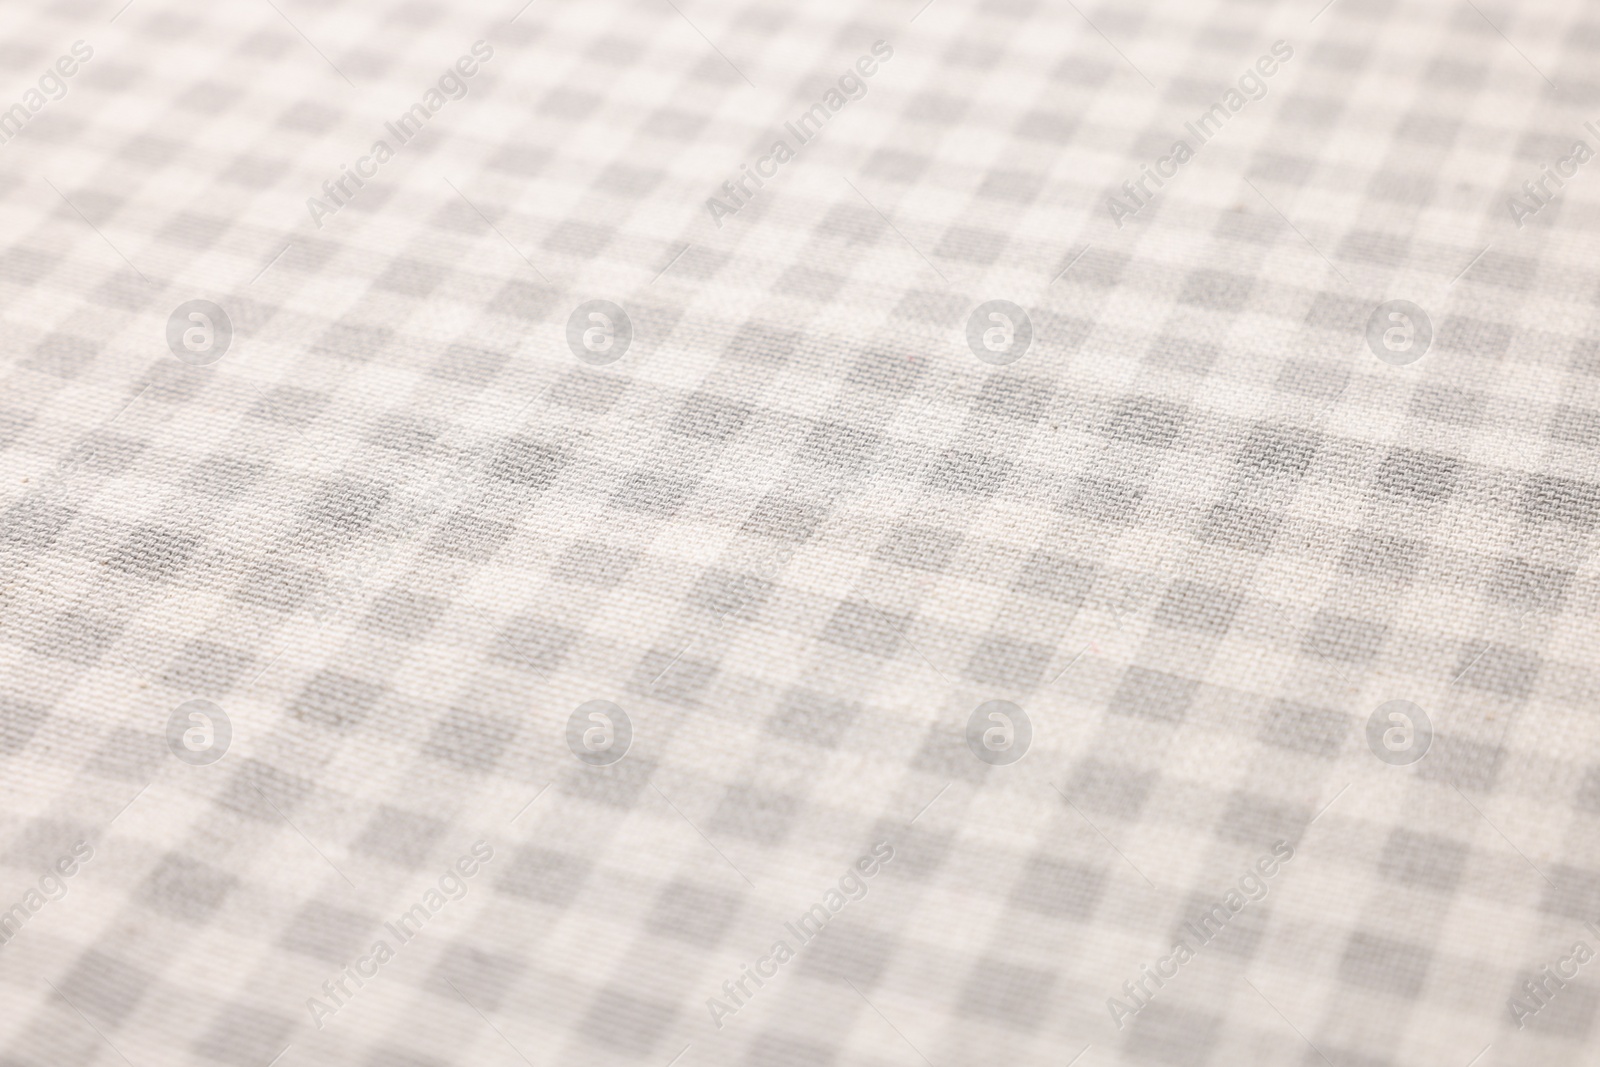 Photo of Beige checkered tablecloth as background, closeup view